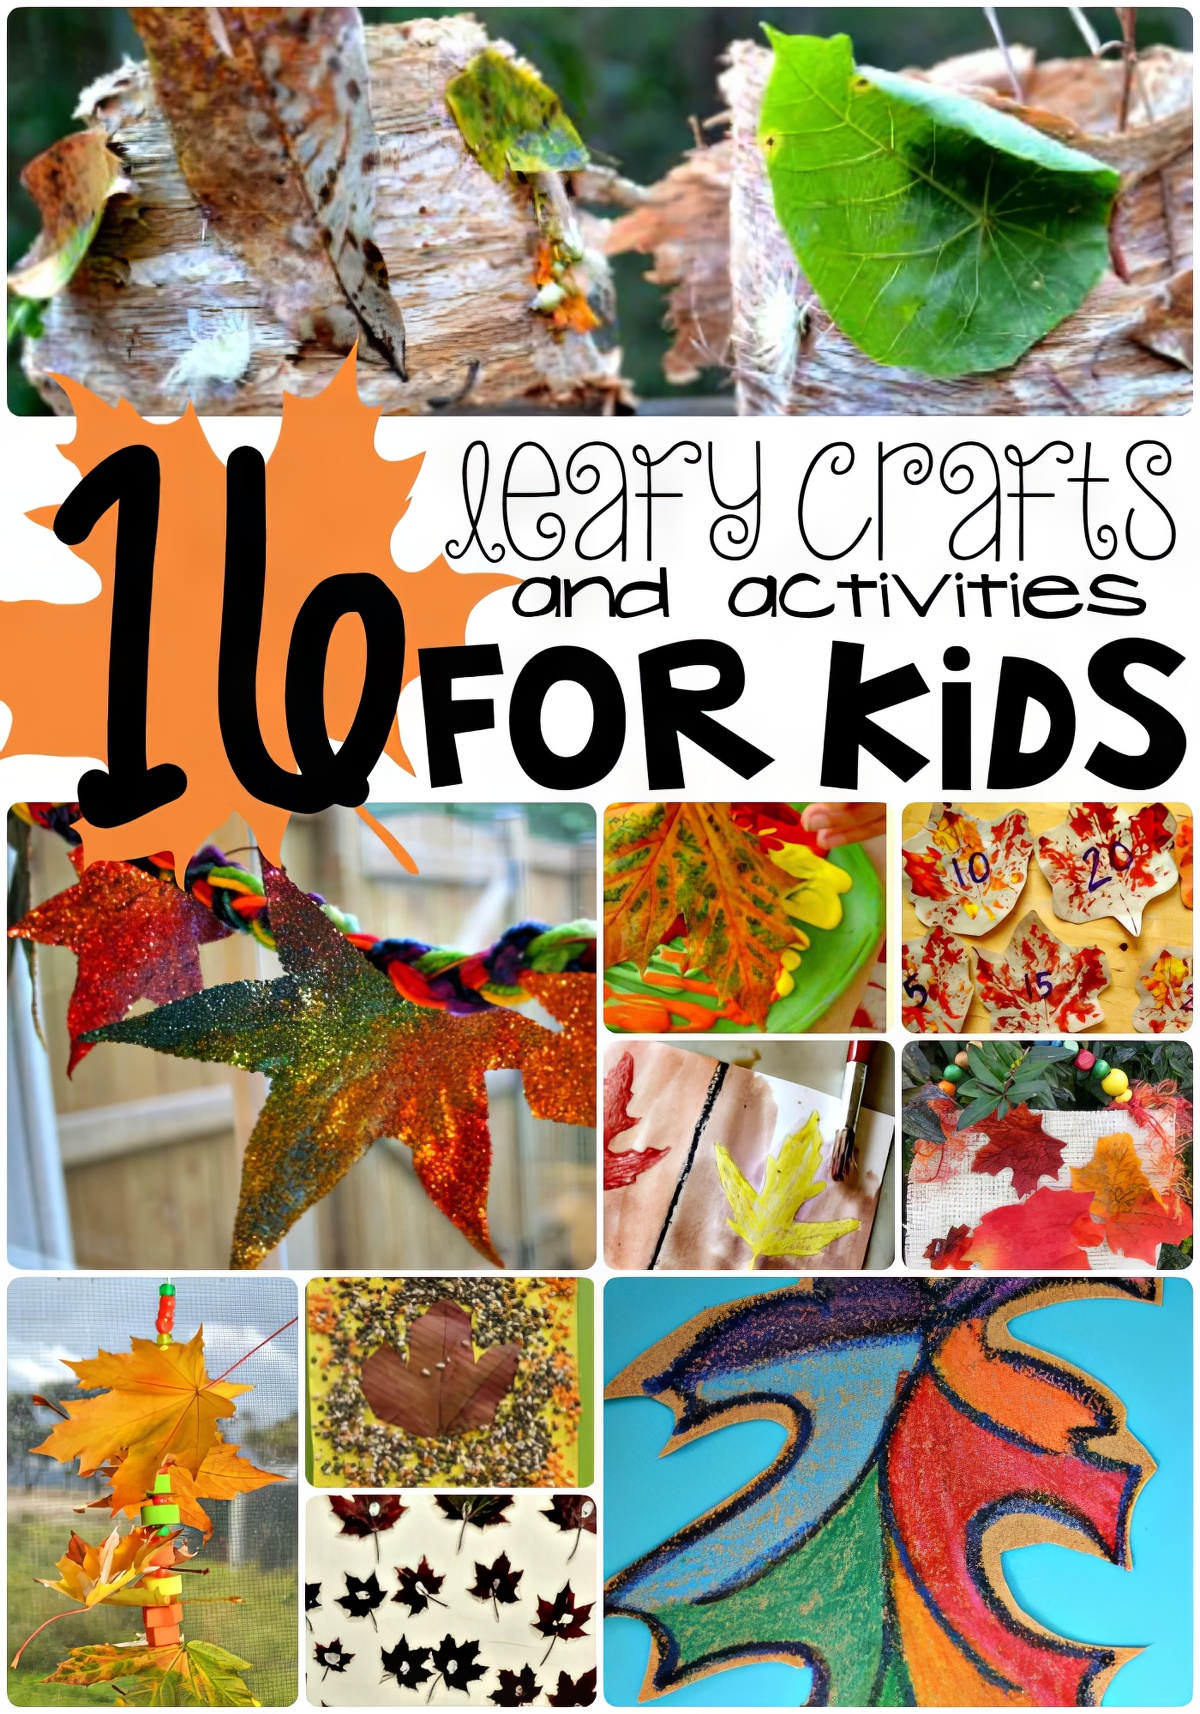 13-leafy-crafts-and-activities-for-kids-700-text